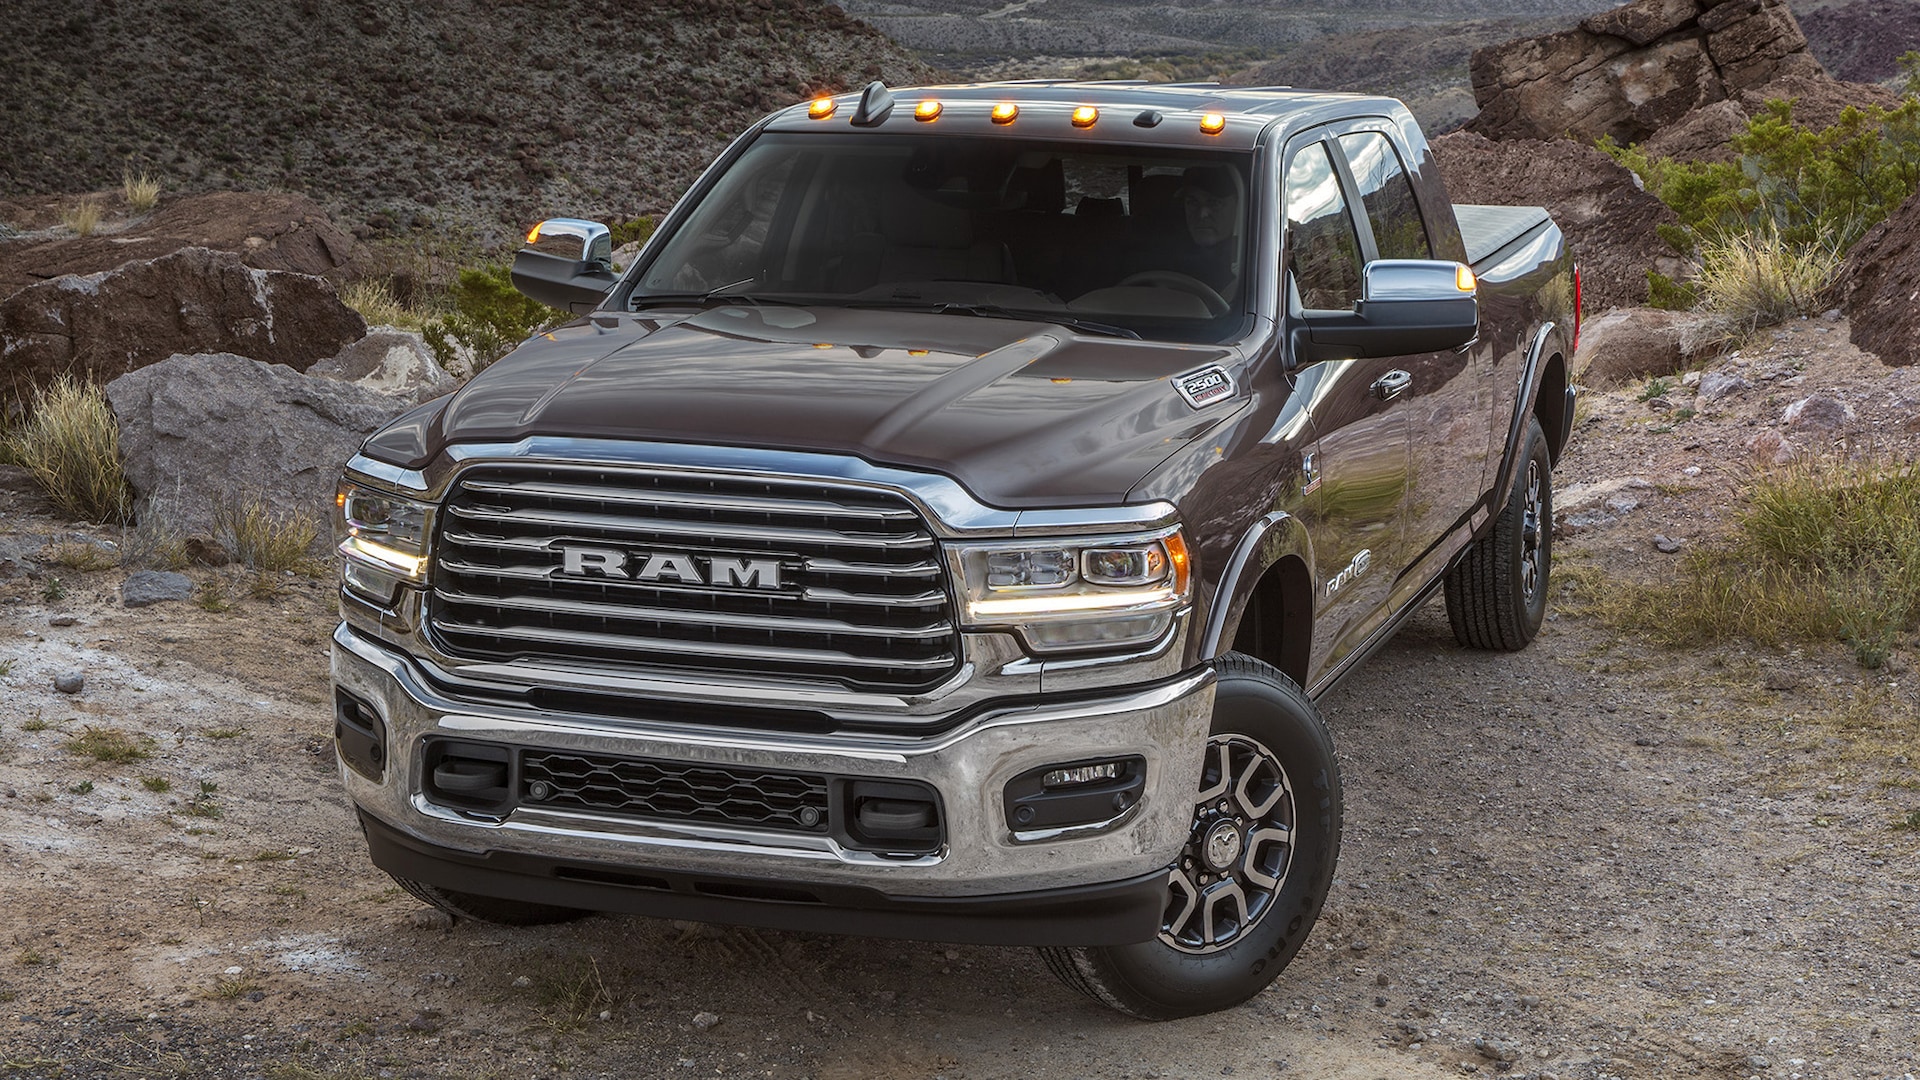 2022 Ram 2500 Prices, Reviews, and Photos - MotorTrend